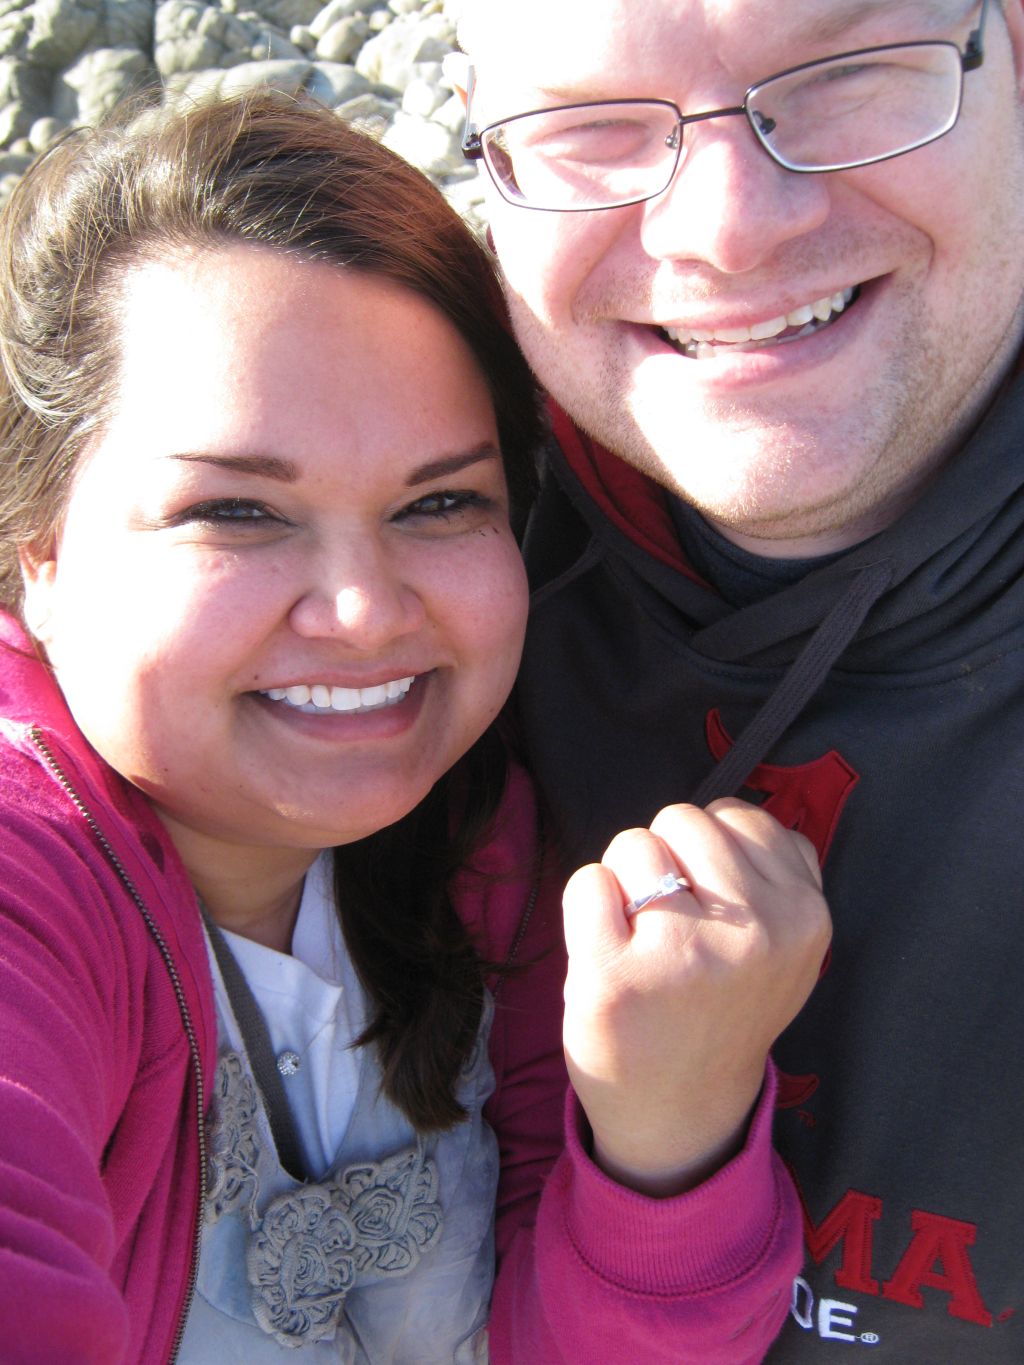 Selfie in the sun for newly engaged Christian singles. A woman shows off her engagement ring